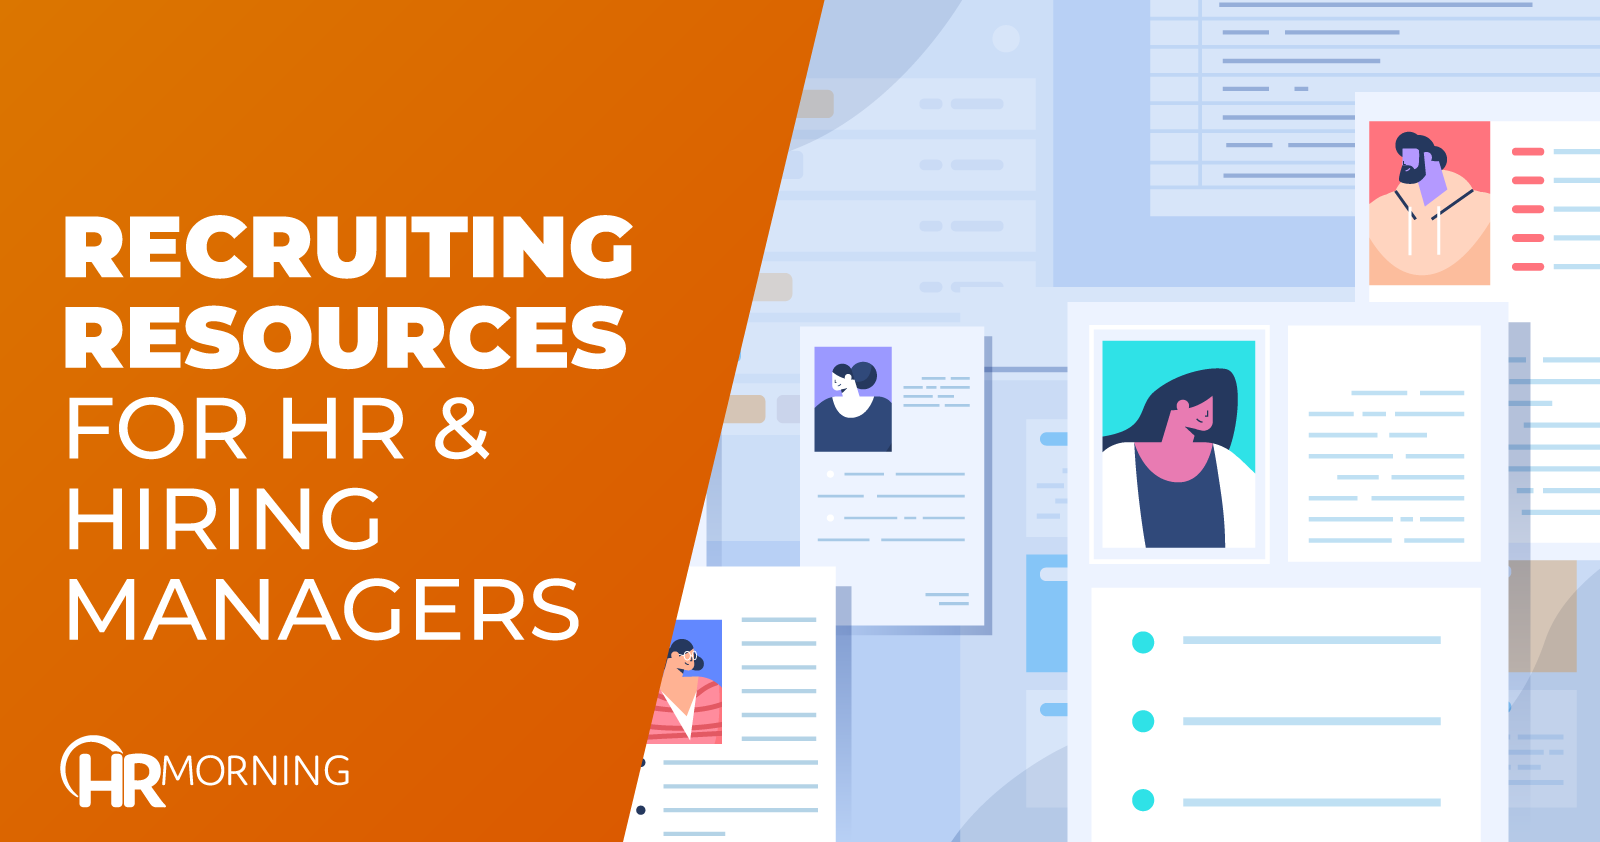 Recruiting Resources for HR & Hiring Managers